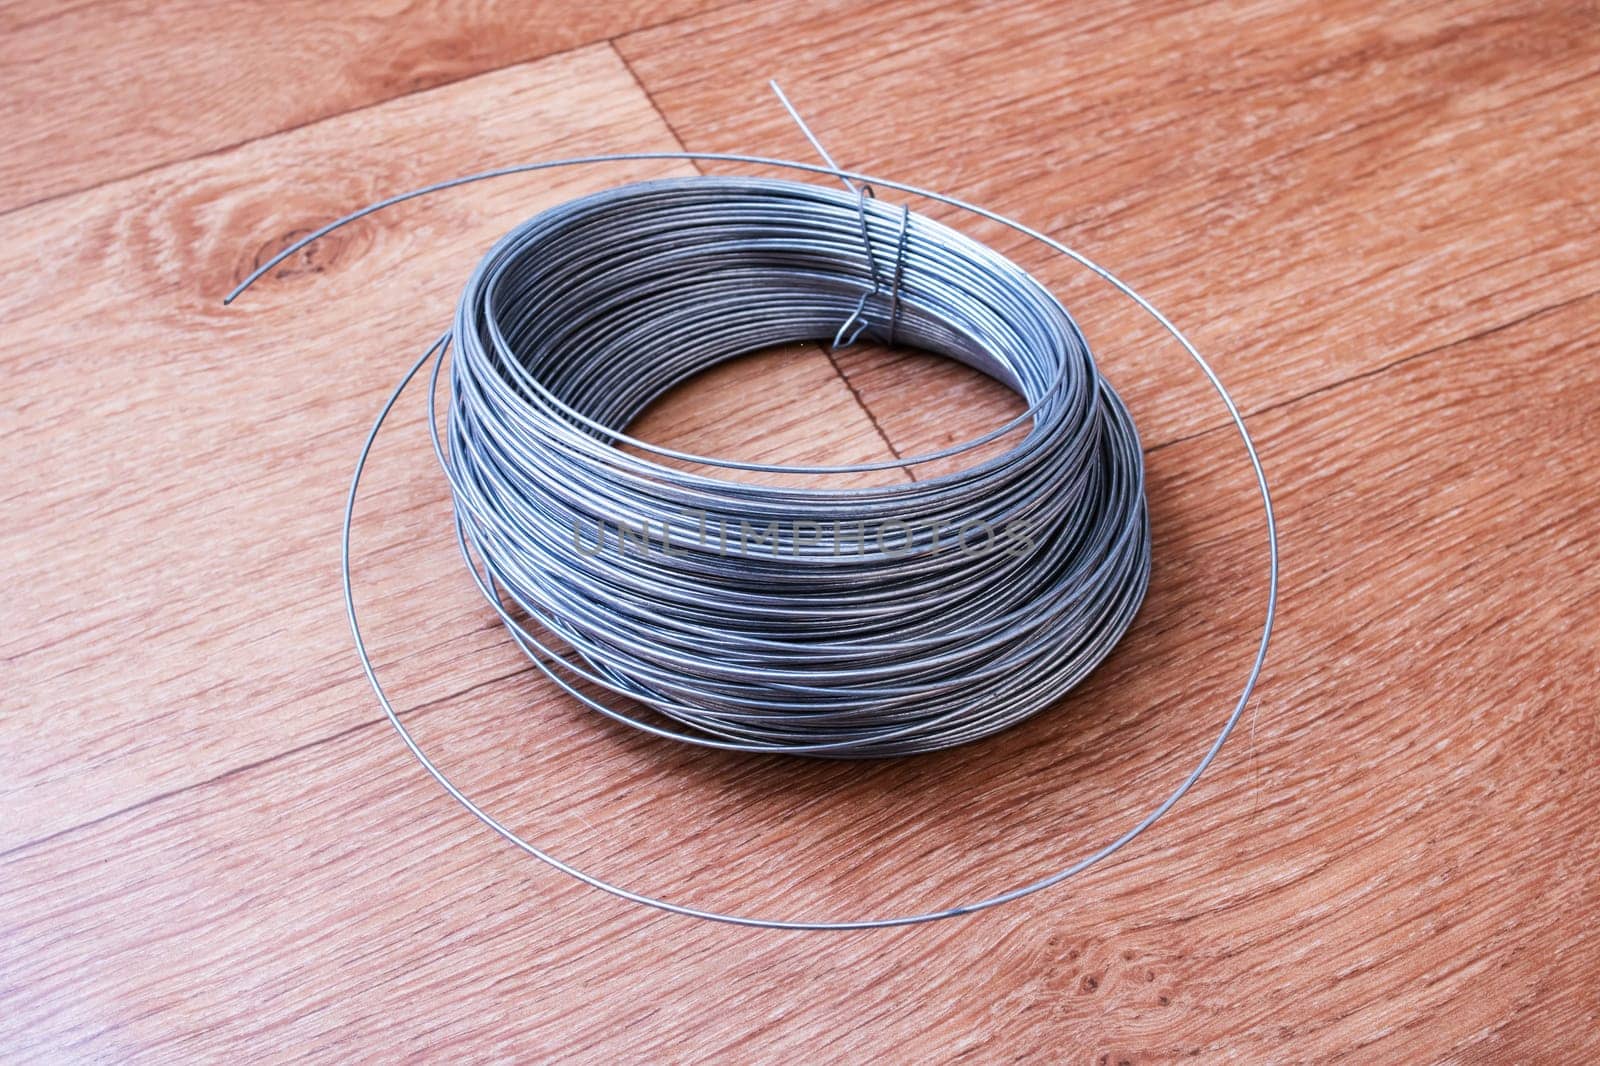 Large coil of wire on the table close up